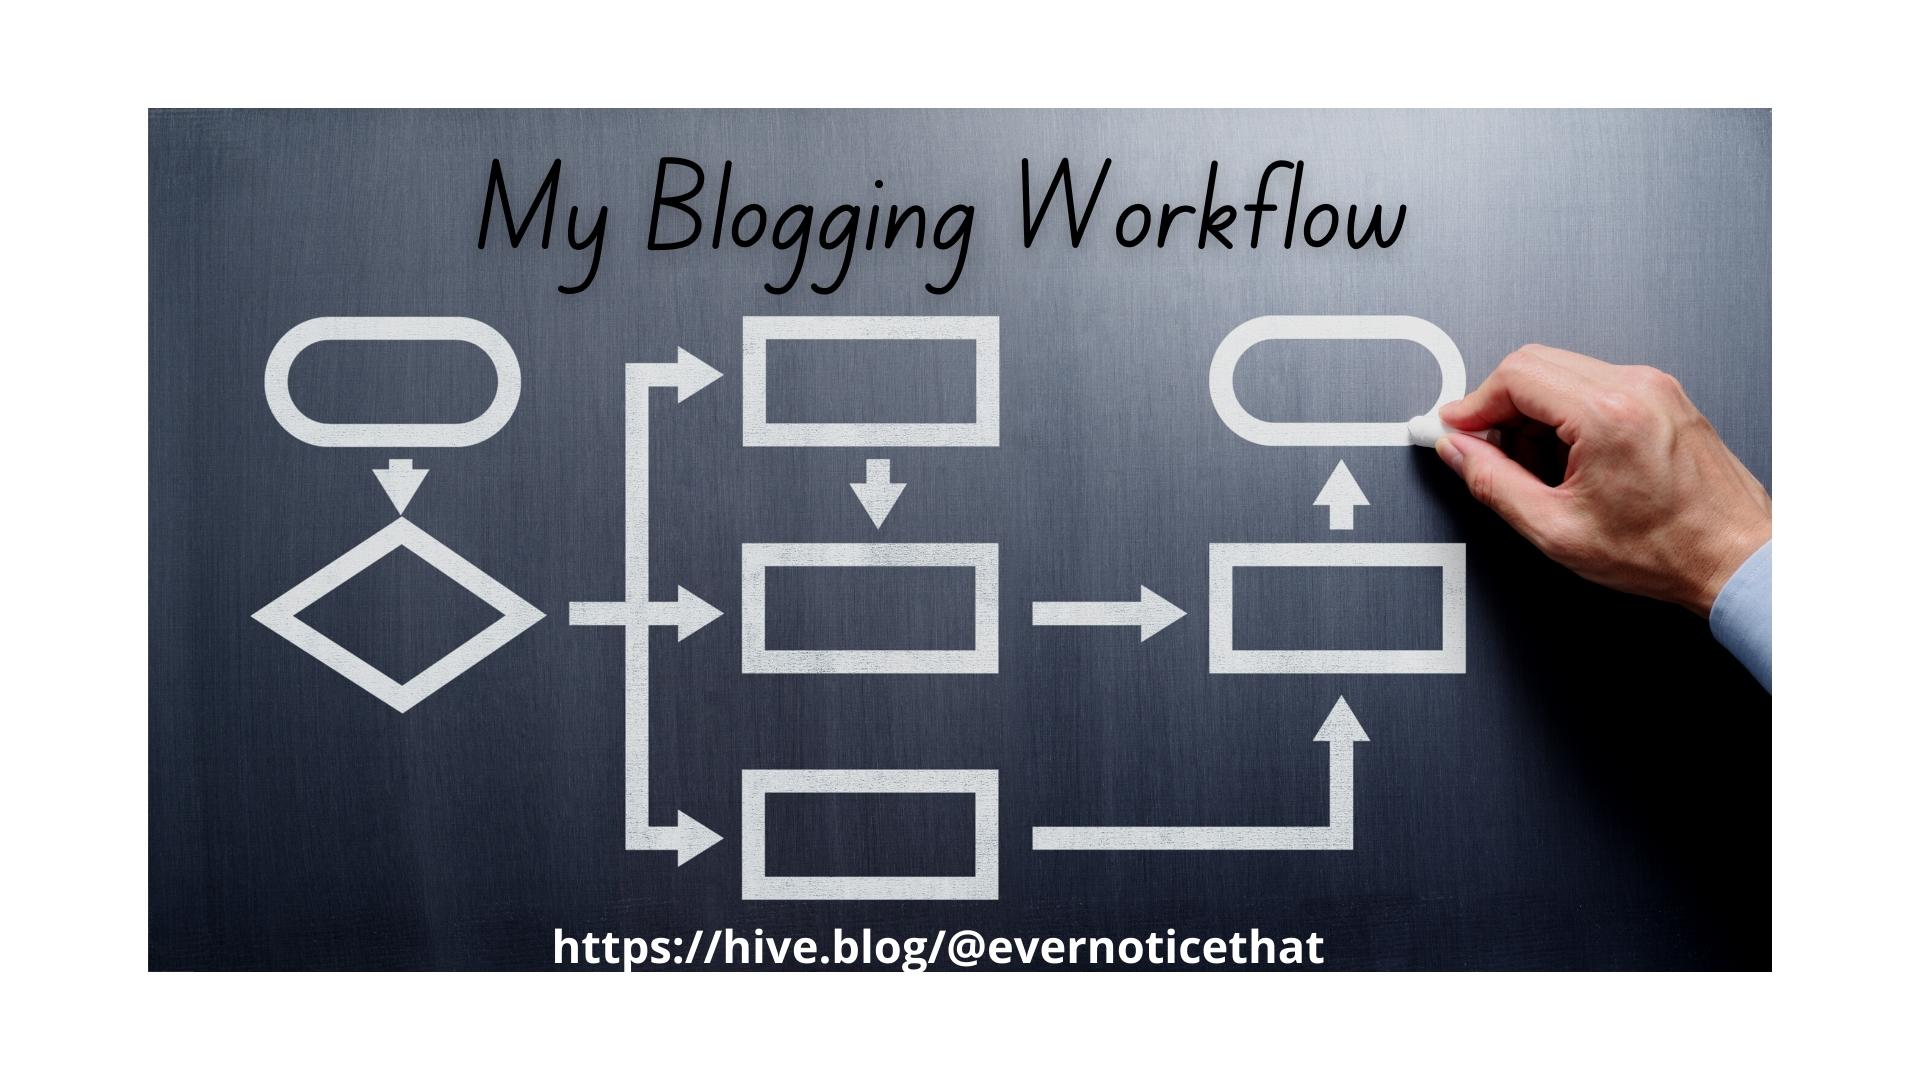 blogging-workflow-blog-blogger-content-creation-writing-hive @EverNoticeThat.jpg